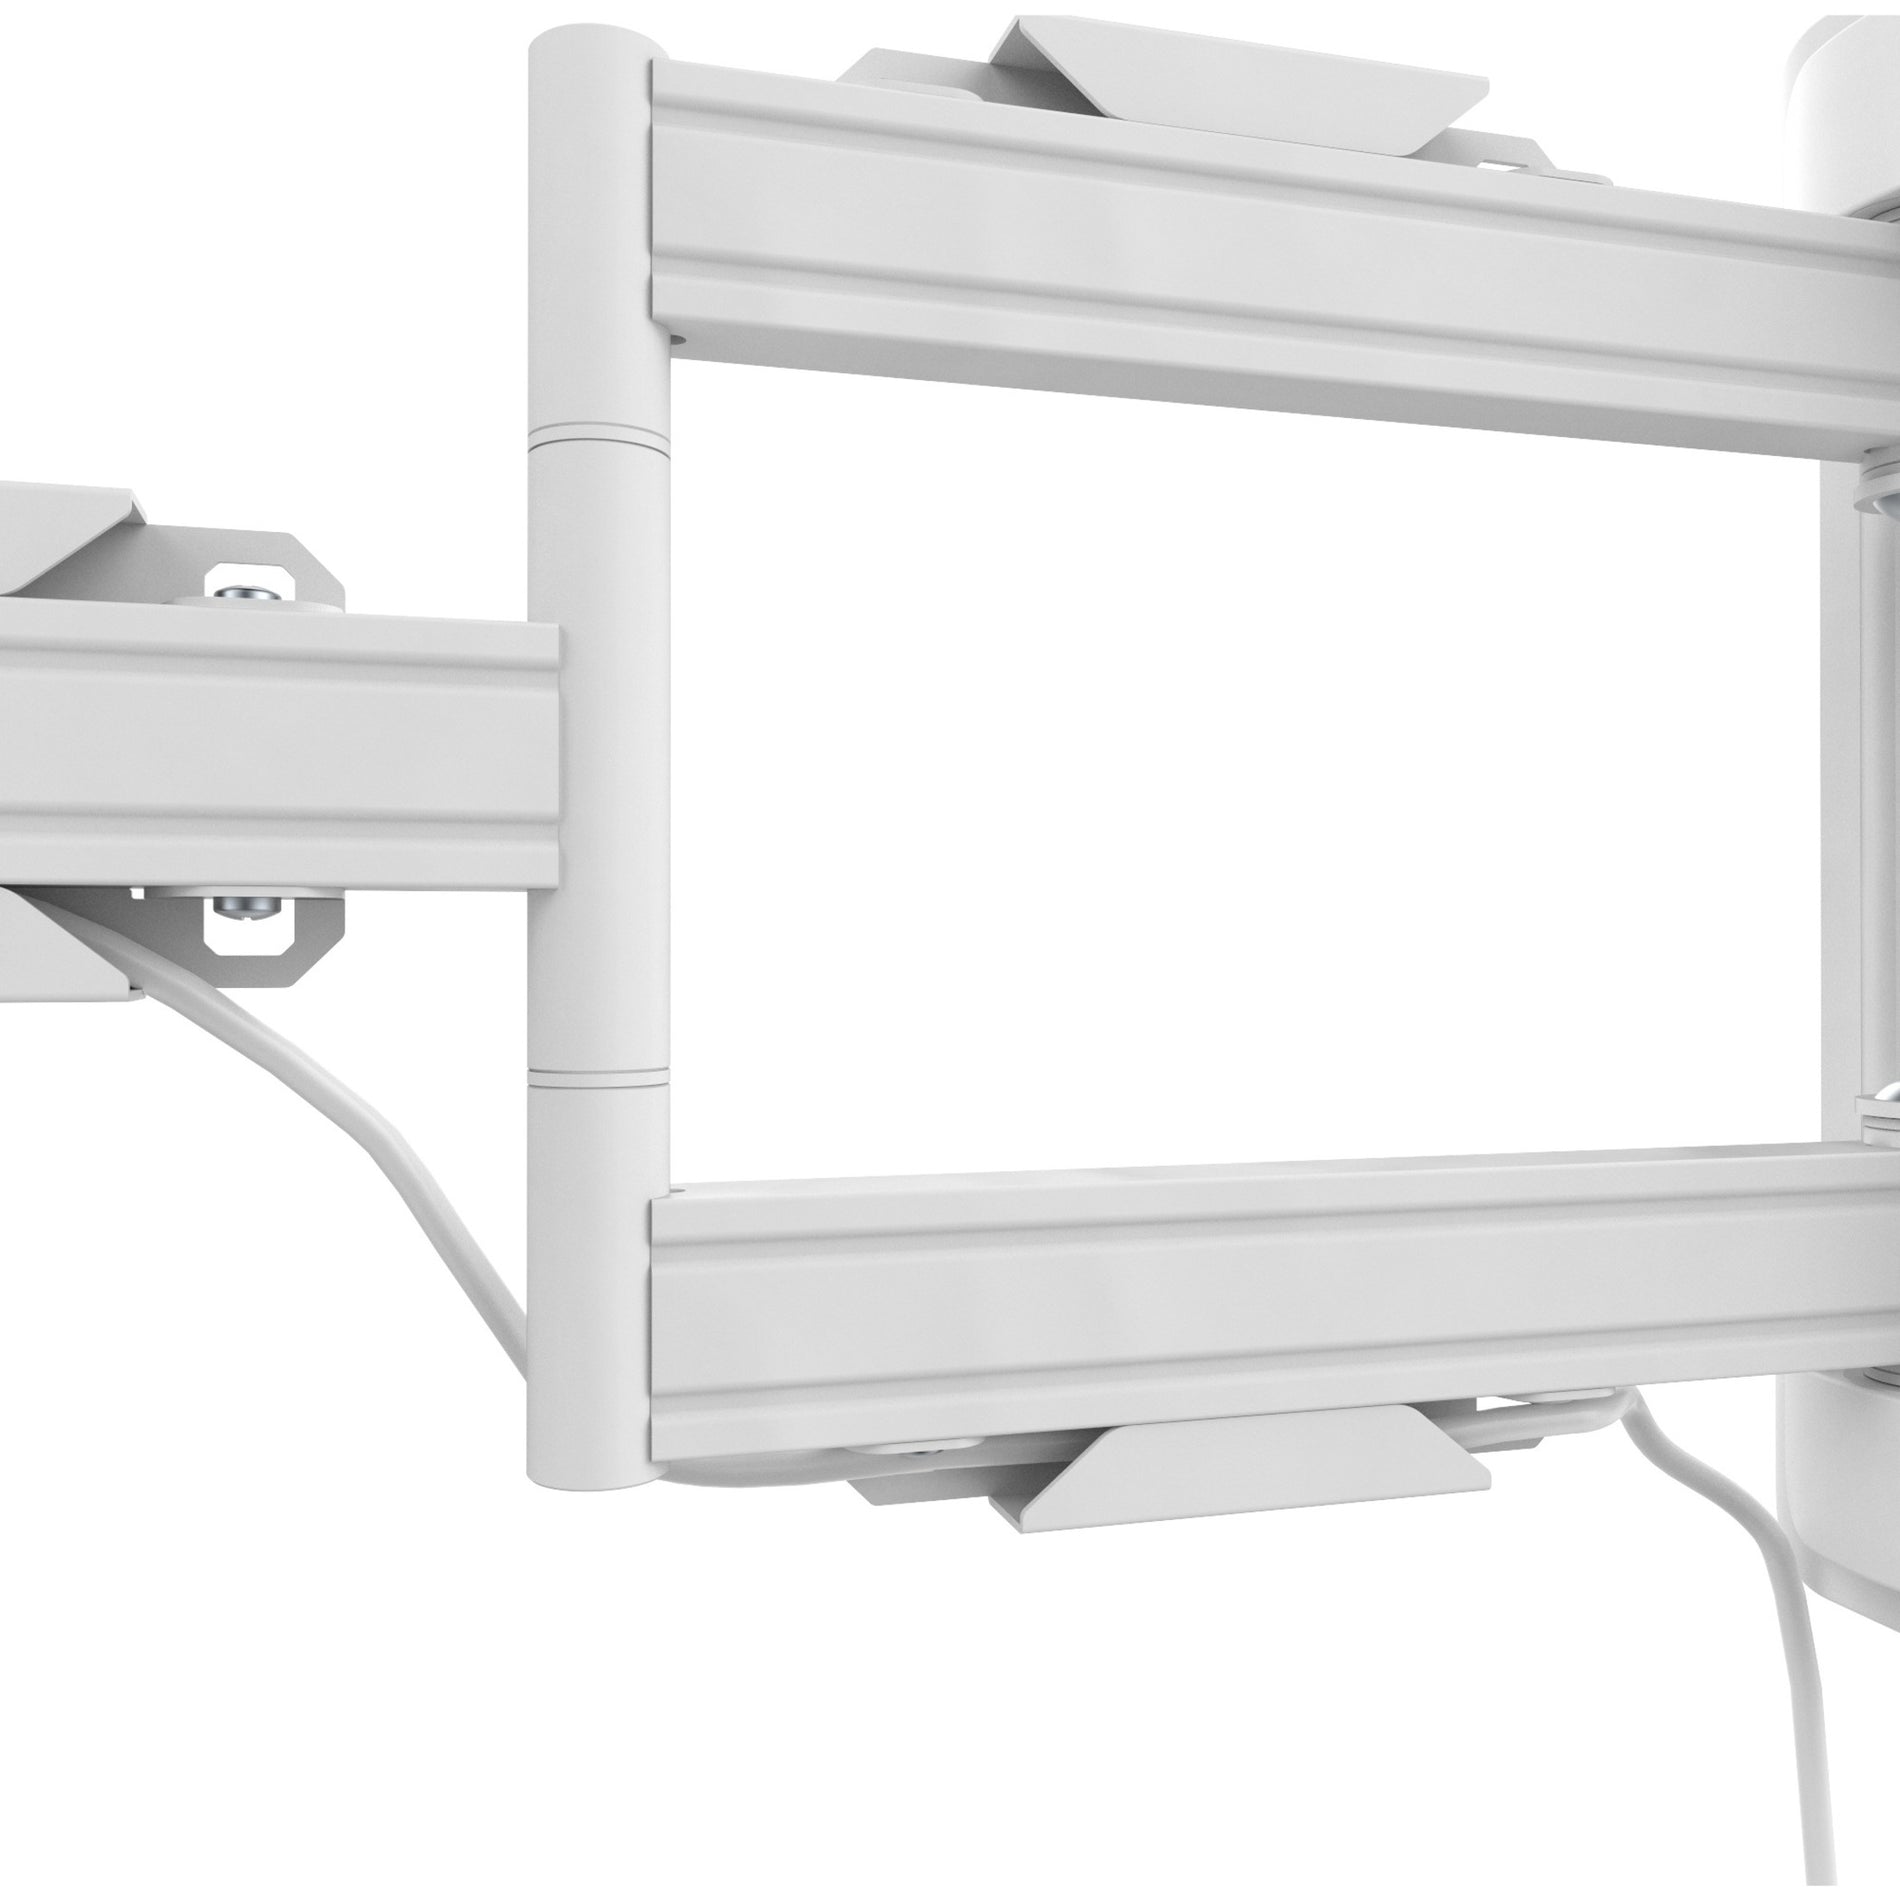 Kanto PS350W Full Motion Wall Mount for 37" to 60" TVs - White [Discontinued]